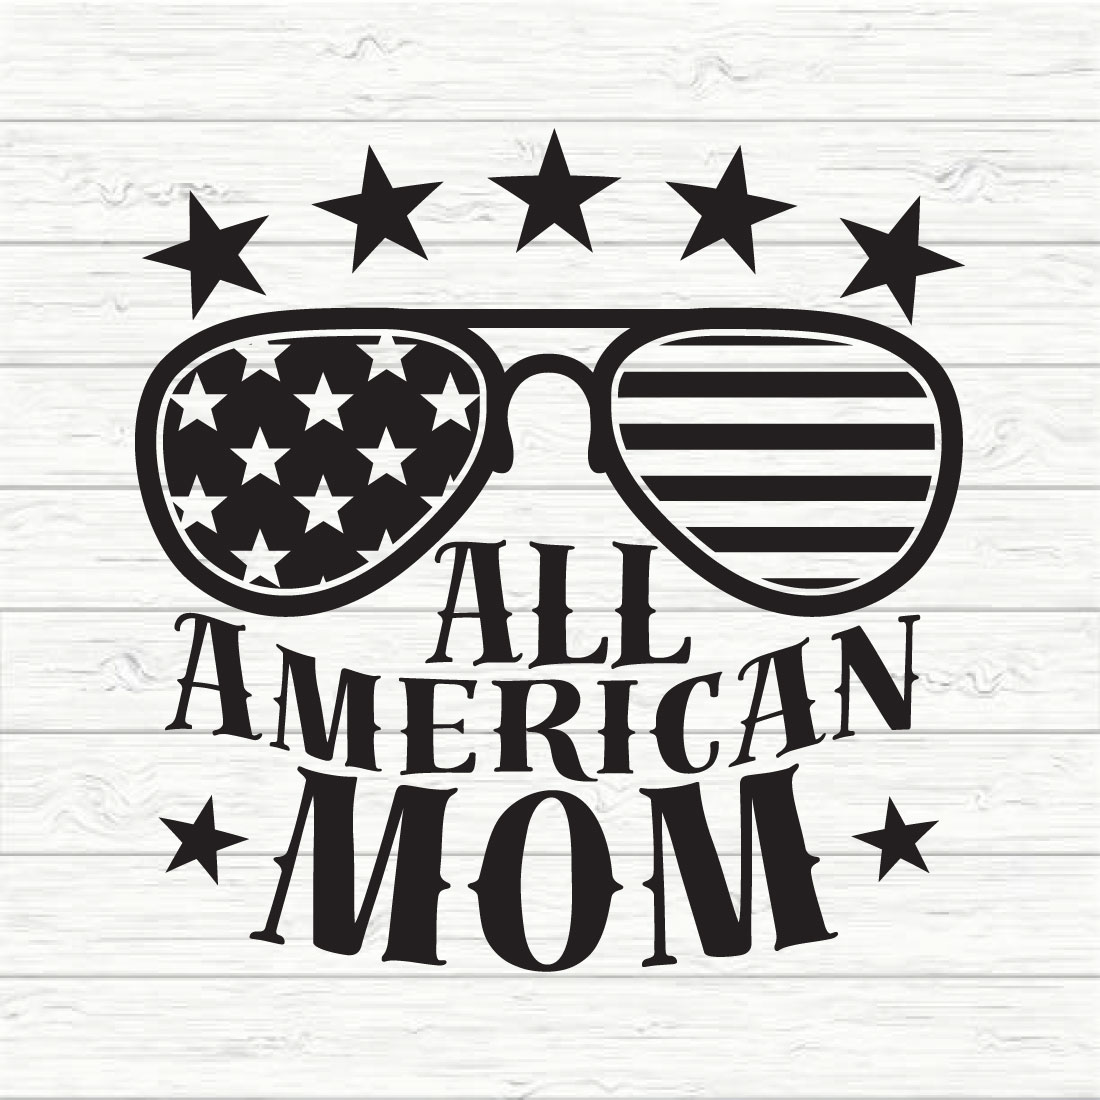 All American Mom preview image.